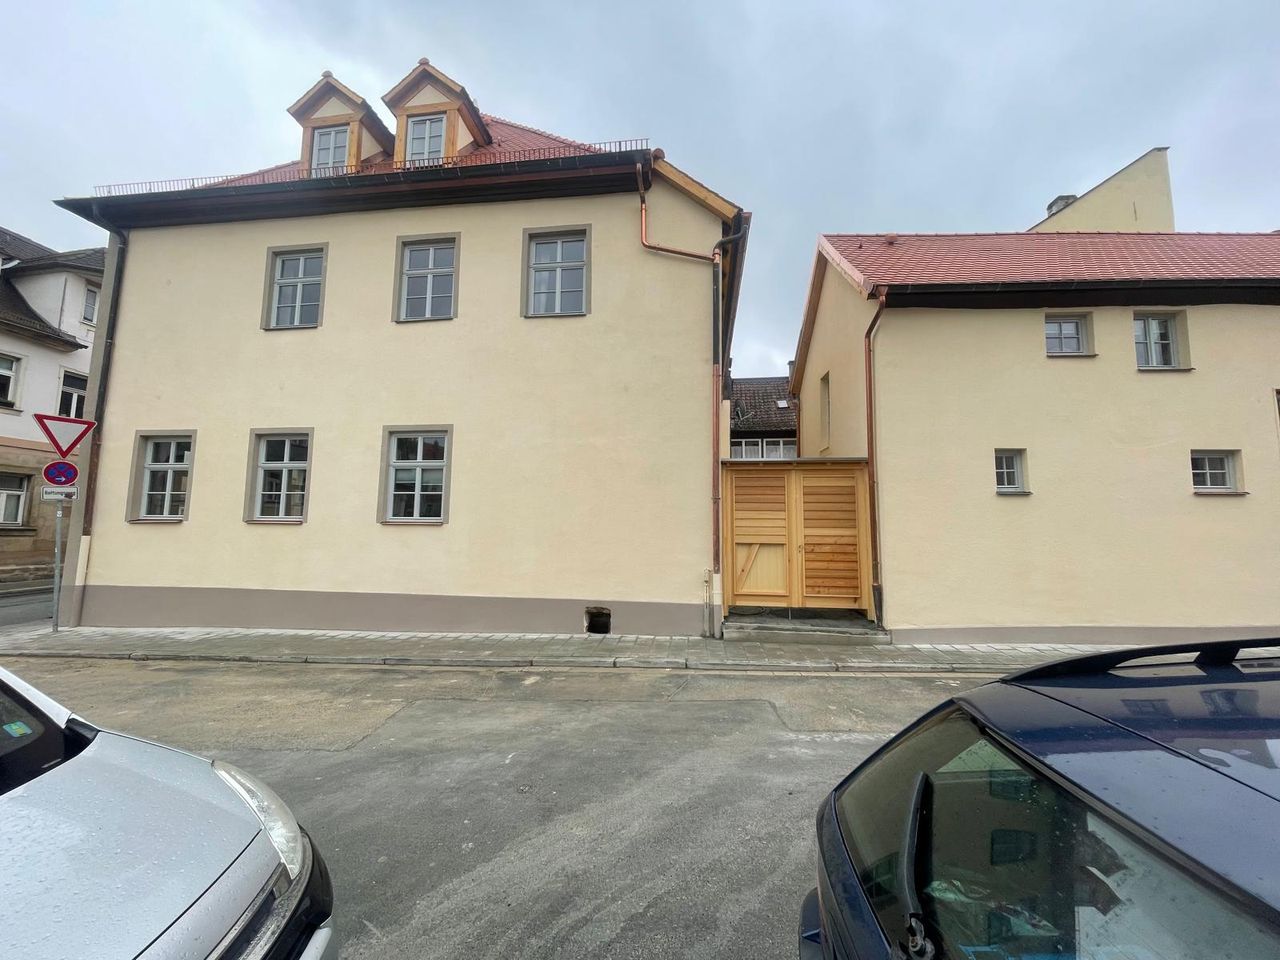 Historic horse stable house, contract with extension option, 2 floors, first occupancy, fully furnished, central, old town Erlangen, quiet Erlangen